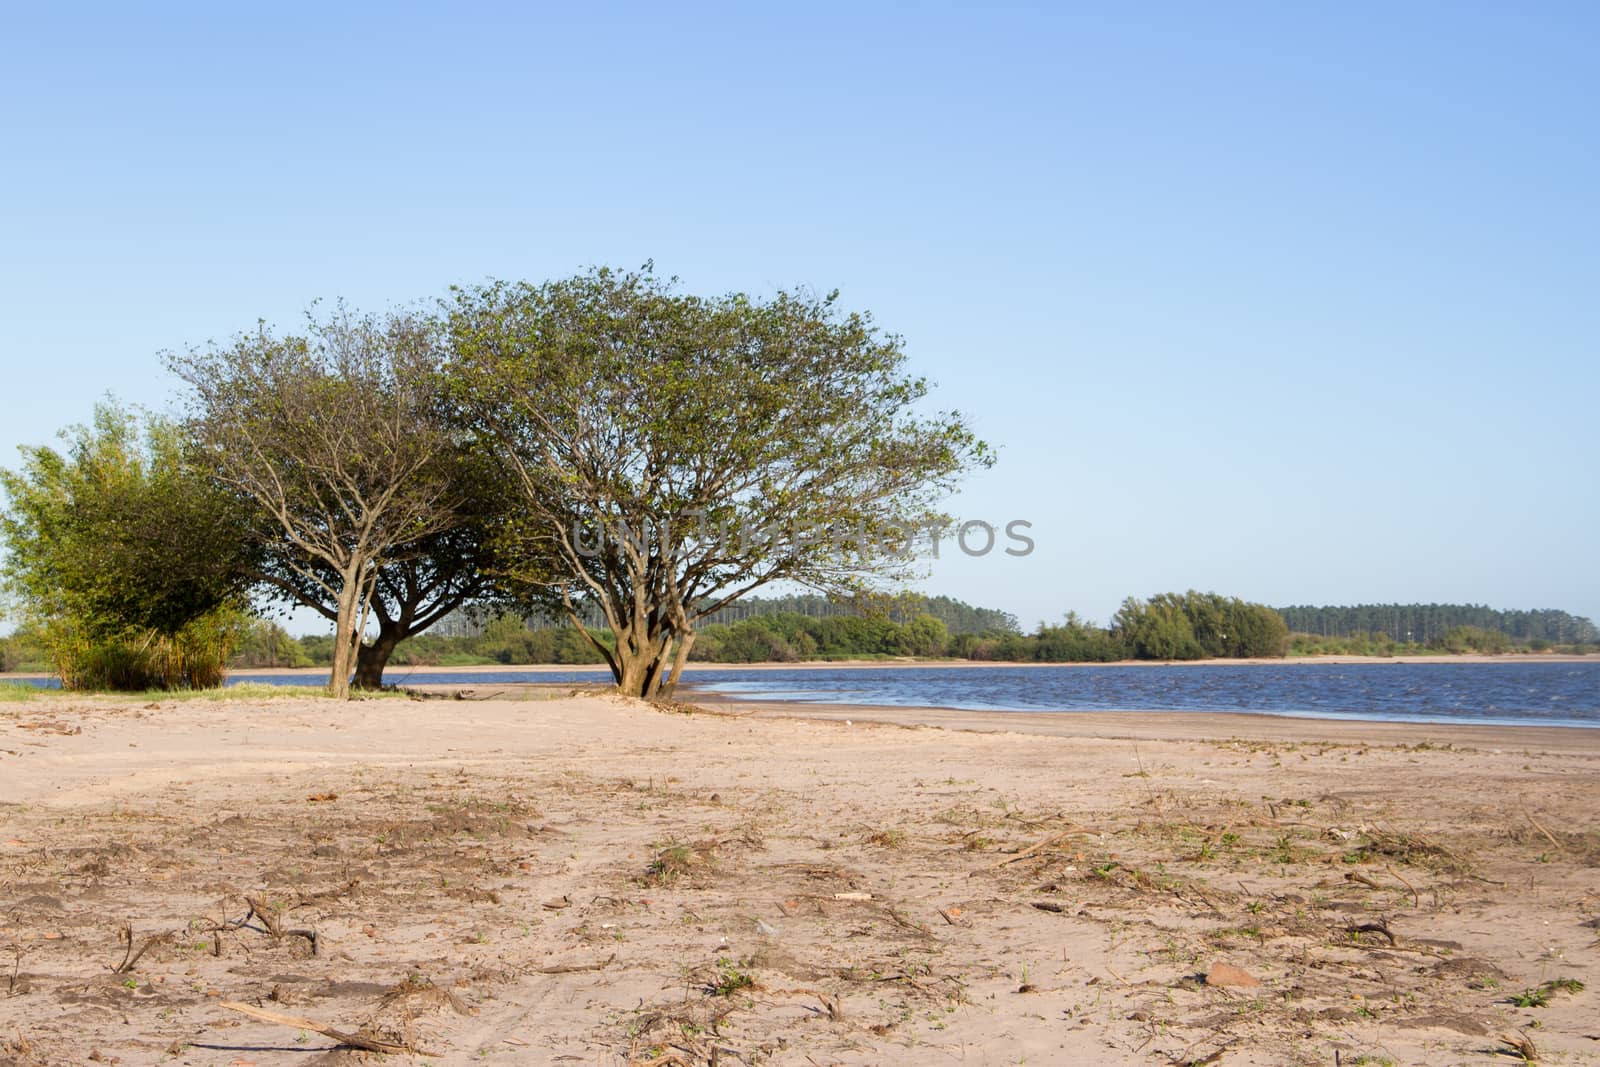 summer landscape on the banks of the river in the city of federation province of entre rios argentina